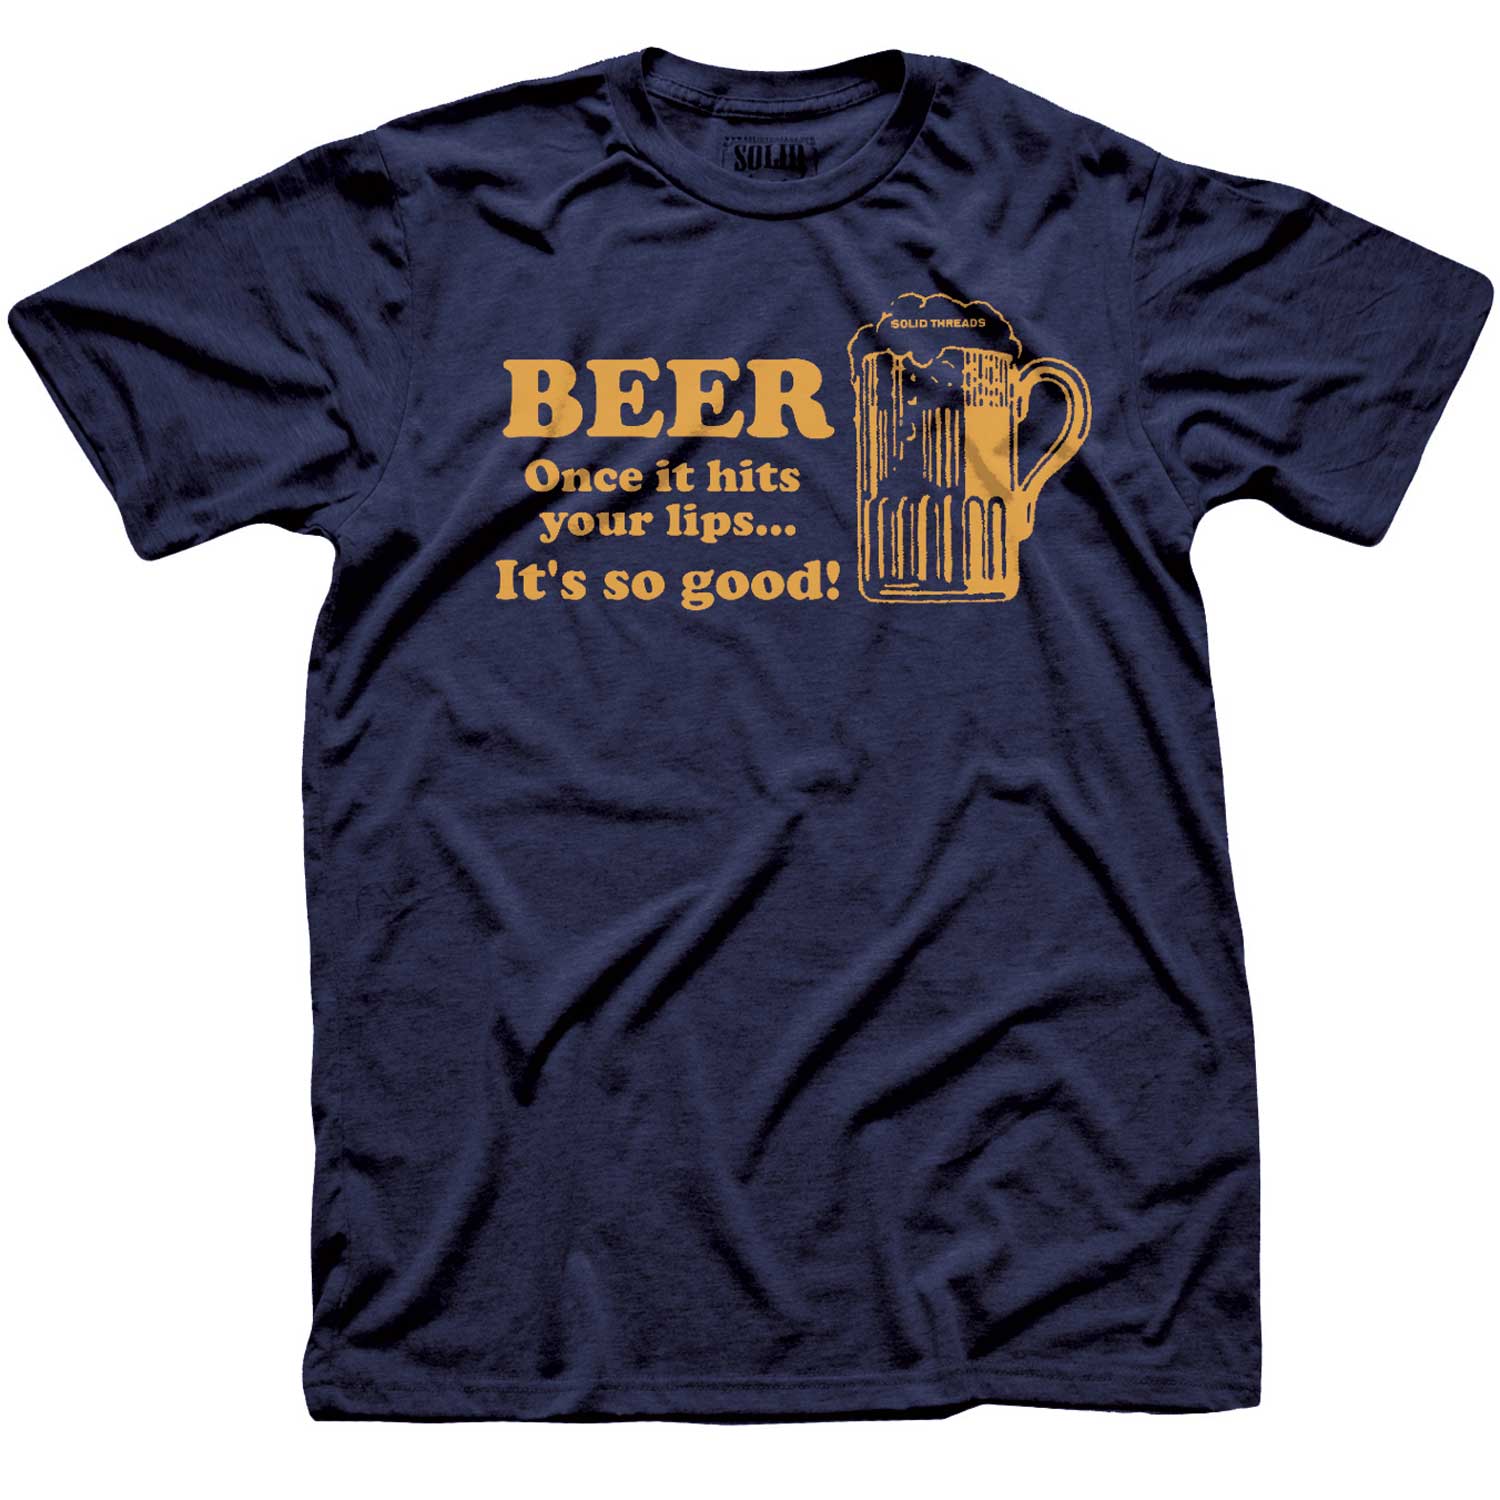 Men's Beer It's So Good When It Hits Your Lips Retro T-shirt | Funny Old School Graphic Tee | Solid Threads